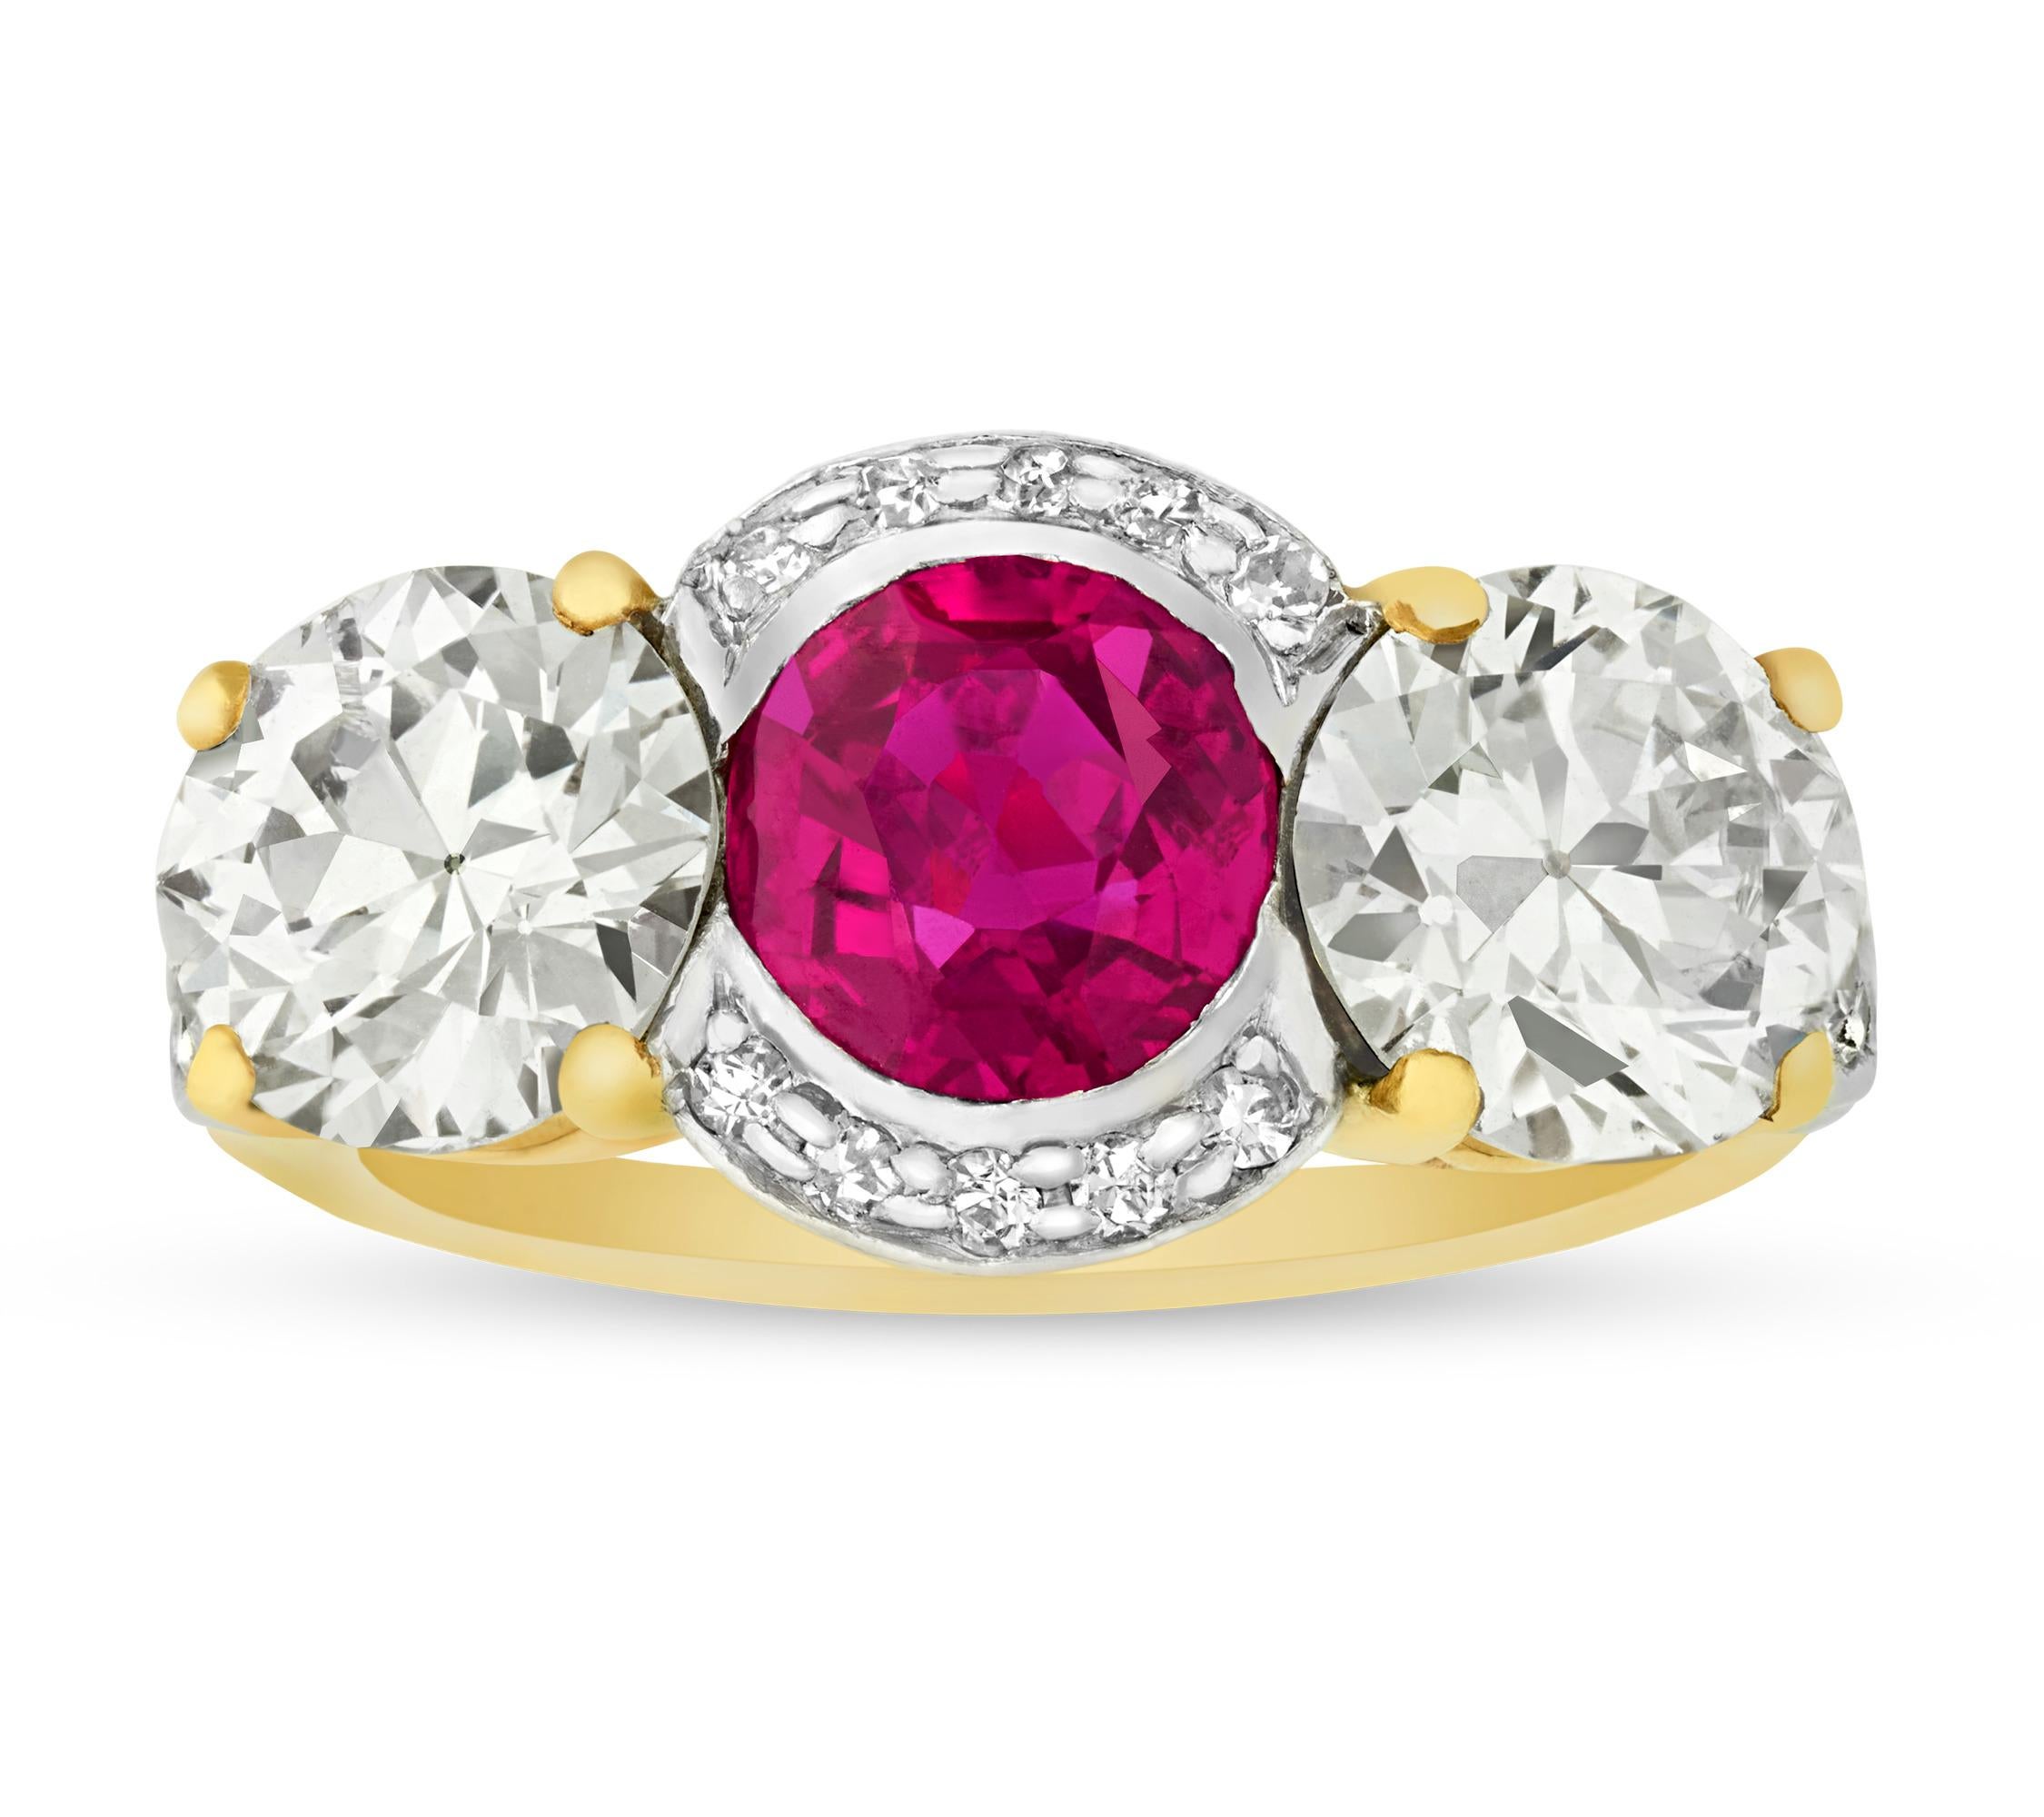 Mixed Cut Antique Burma Ruby And Diamond Ring For Sale